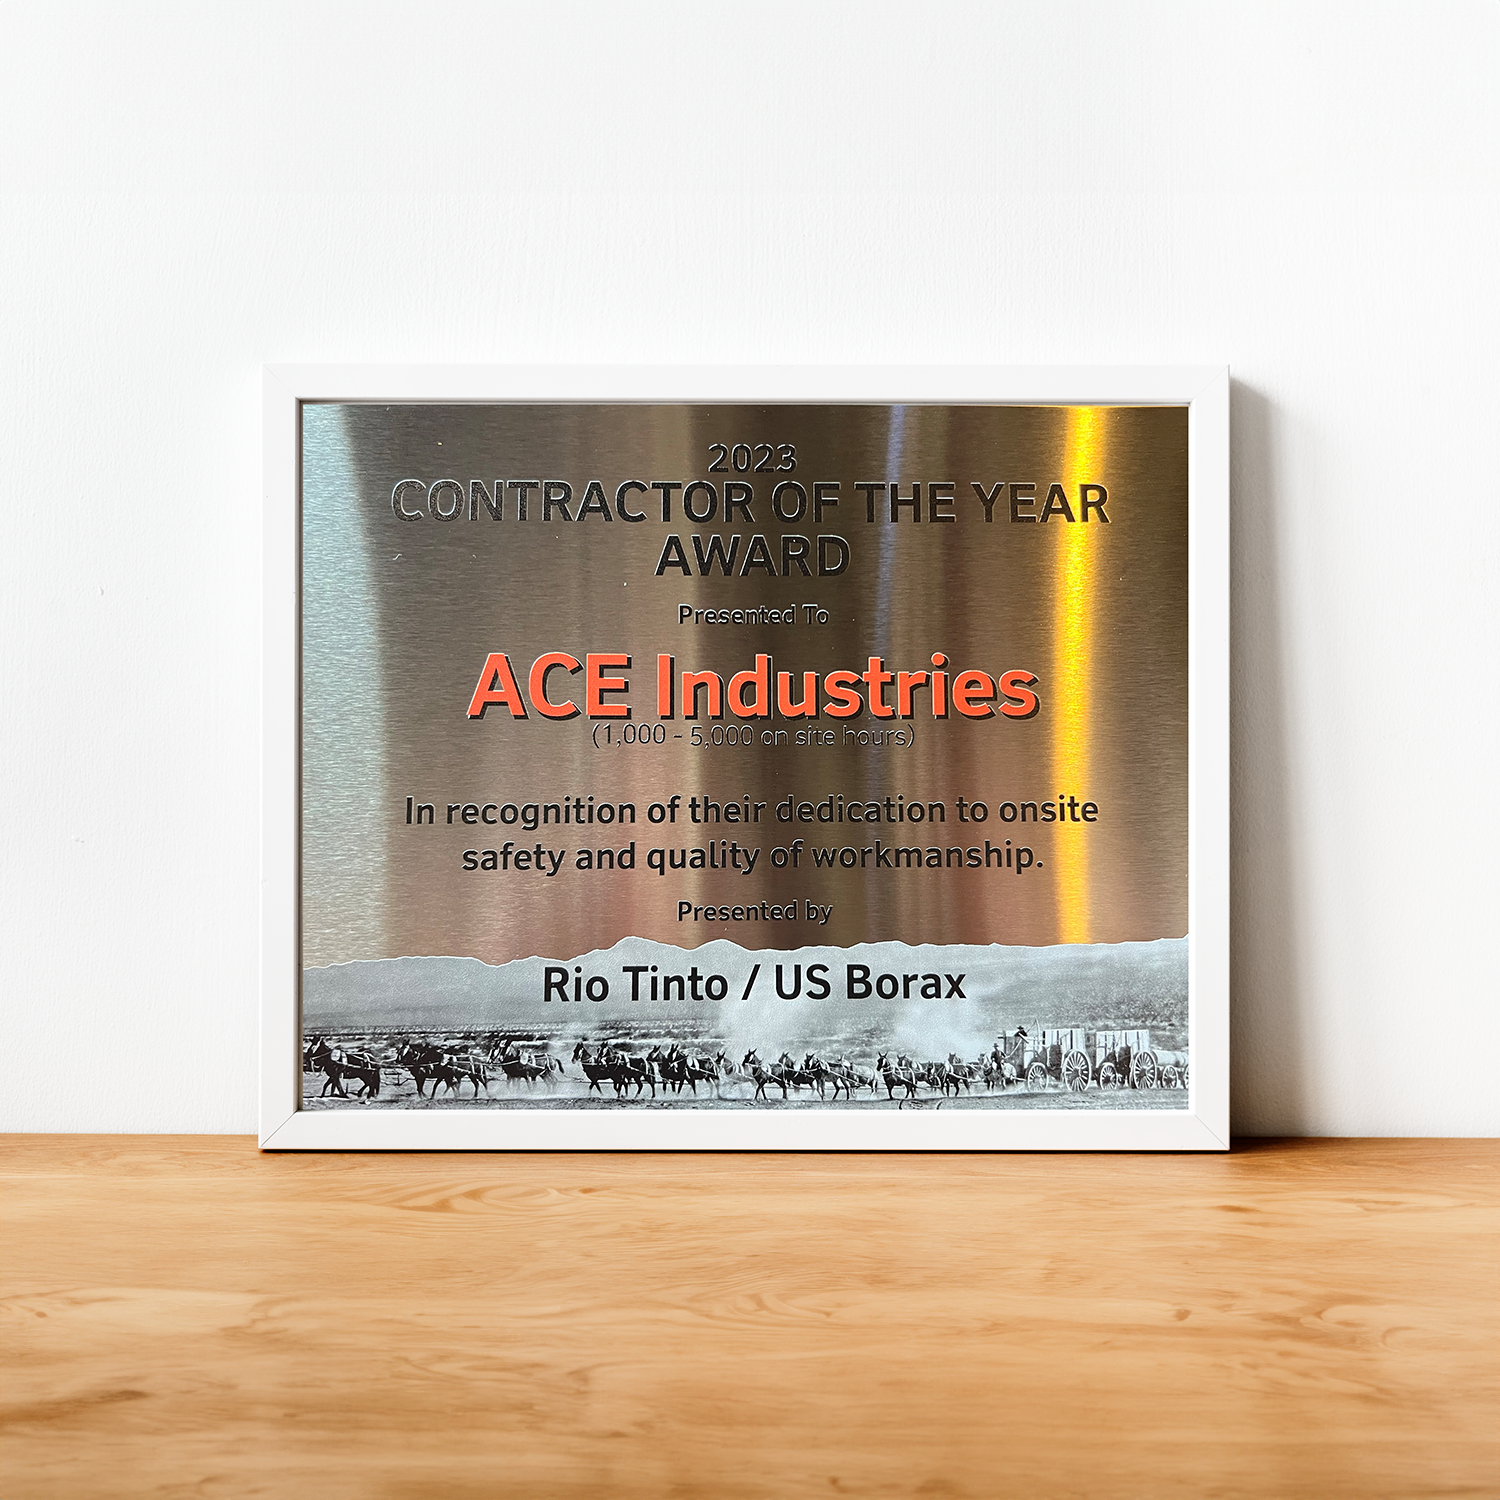 Ace Industries contractor of the year award